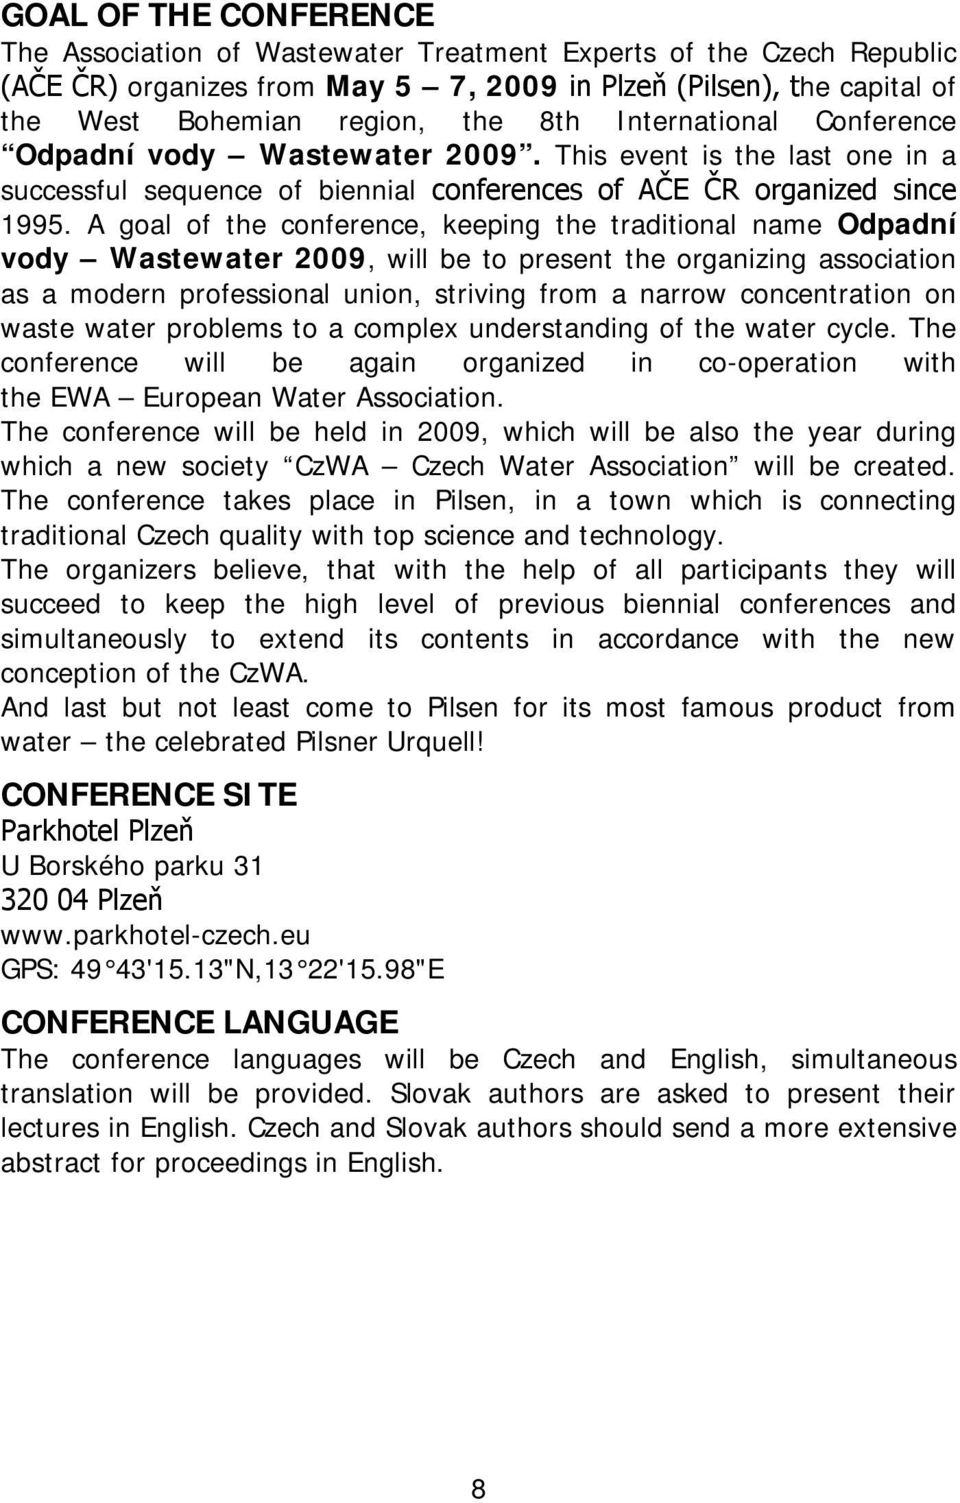 A goal of the conference, keeping the traditional name Odpadní vody Wastewater 2009, will be to present the organizing association as a modern professional union, striving from a narrow concentration